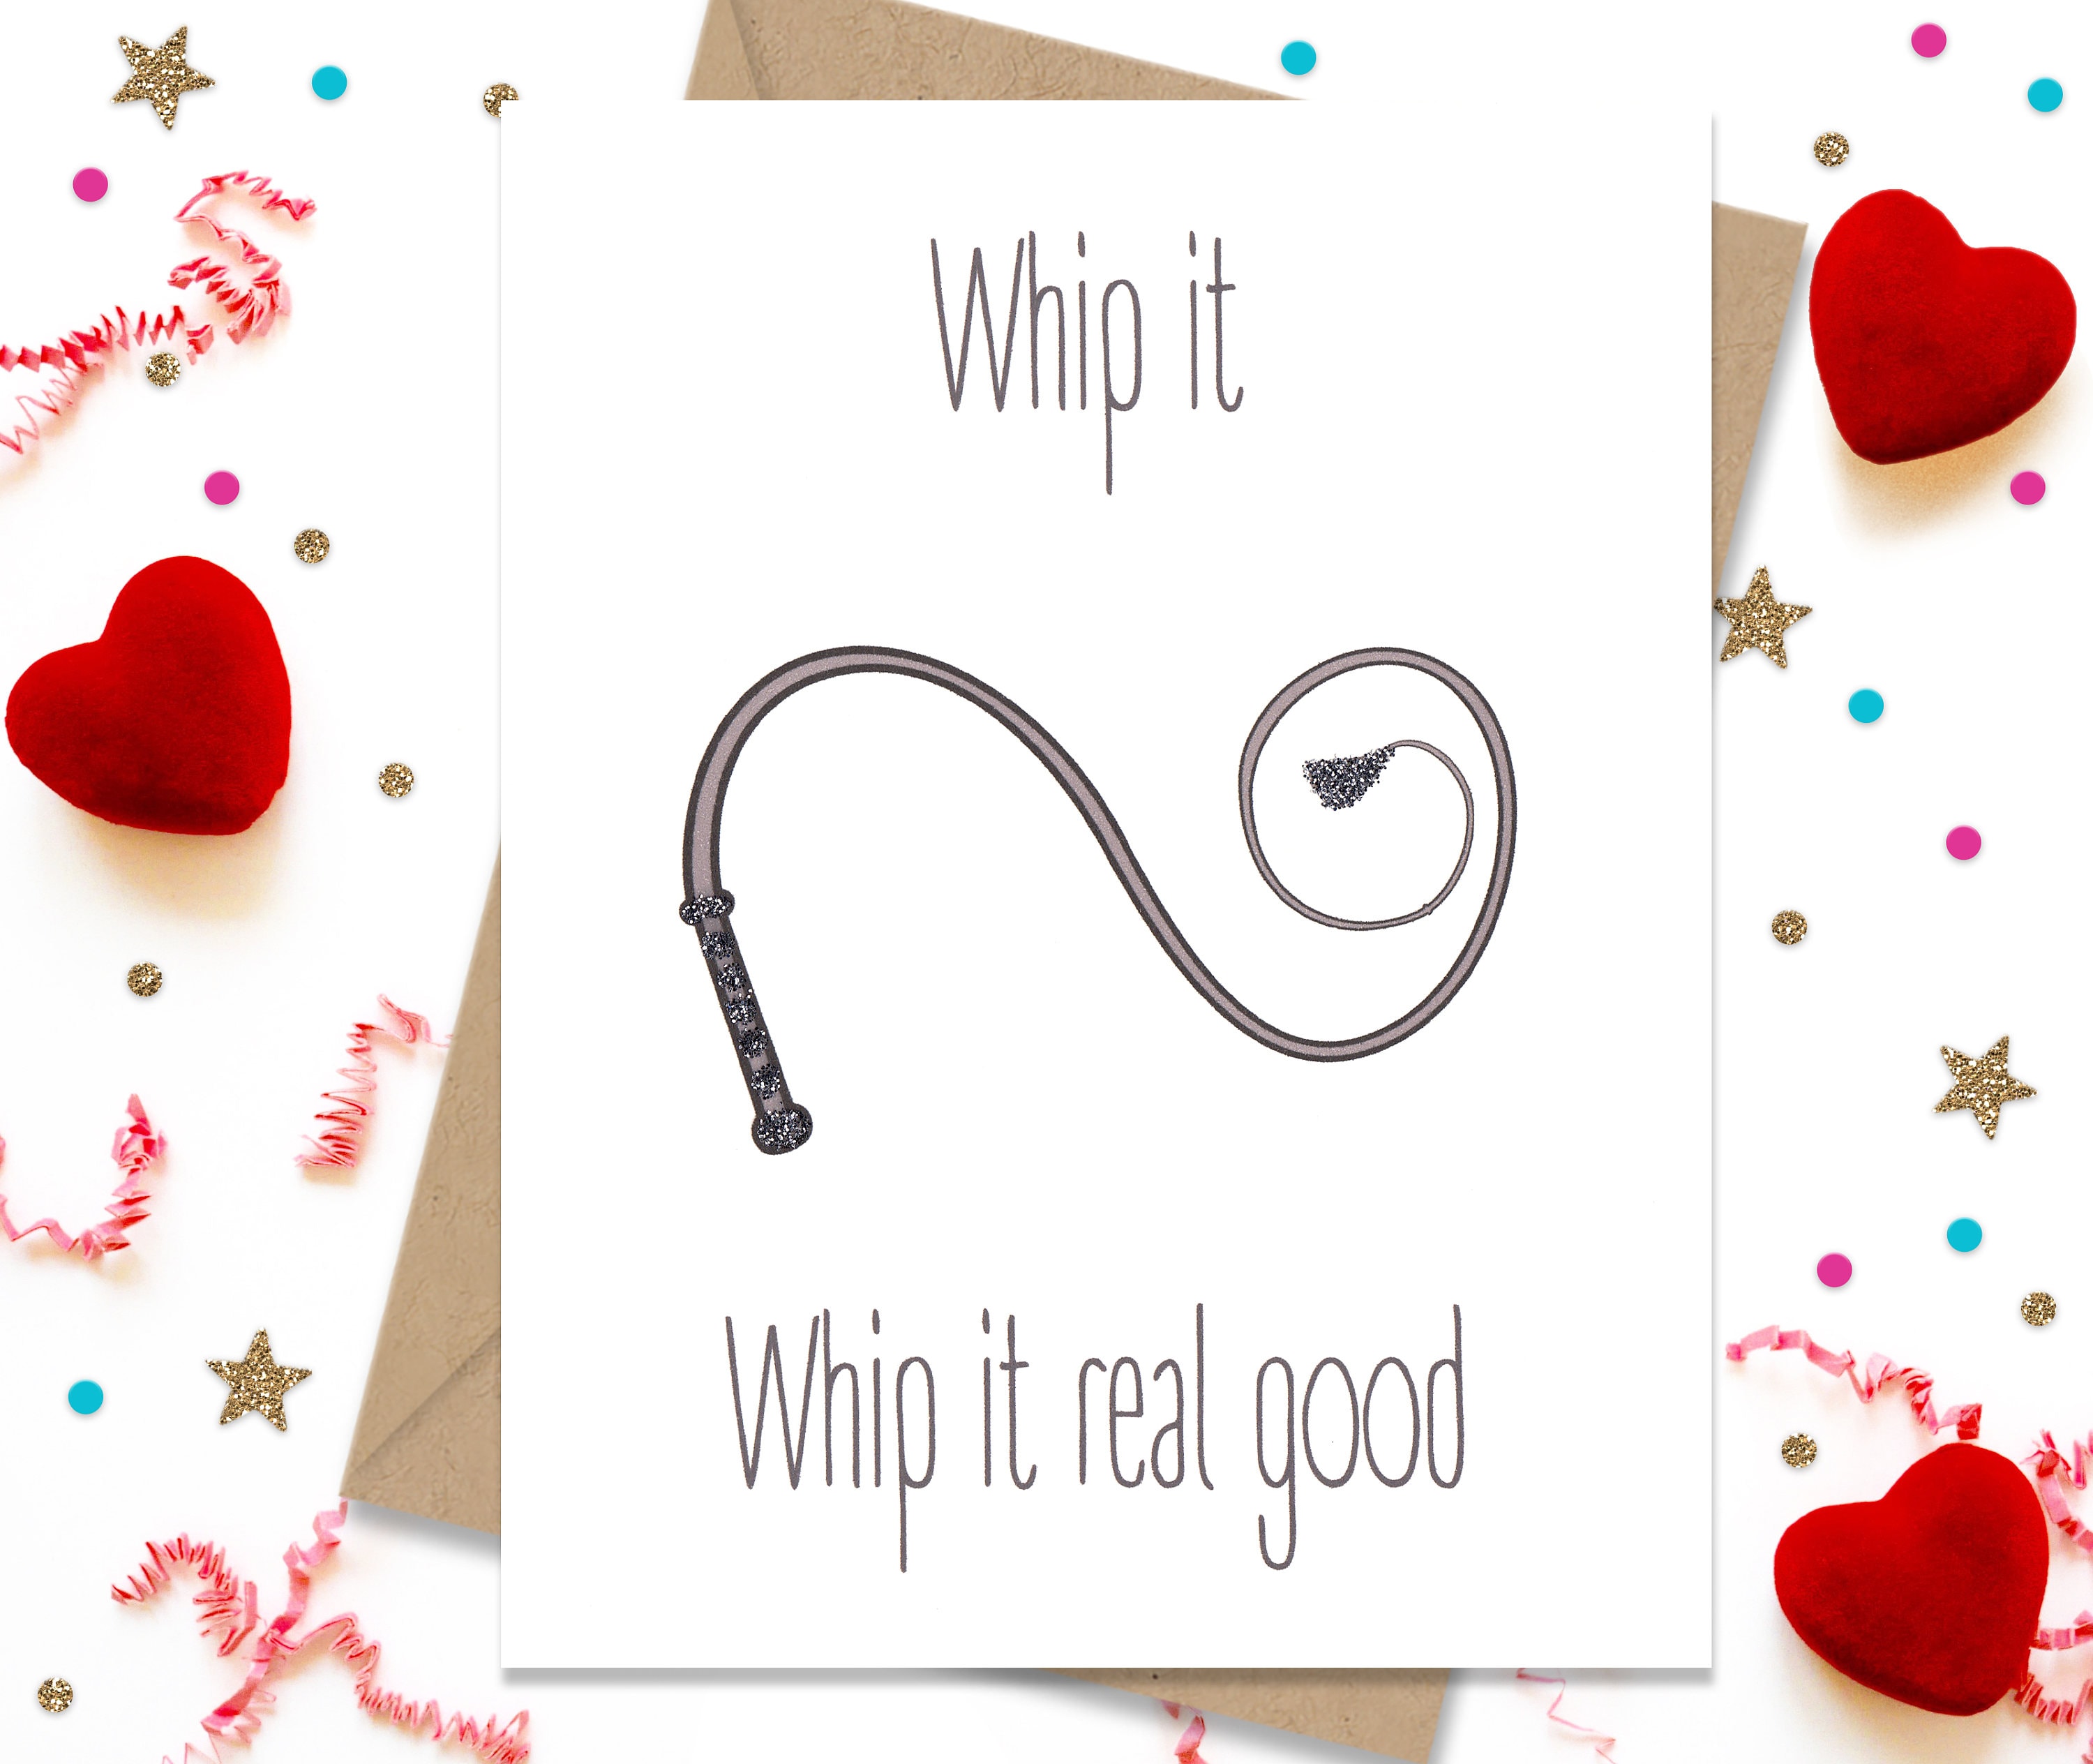 kinky-card-funny-card-bdsm-cardsexy-cards-funny-greeting-etsy